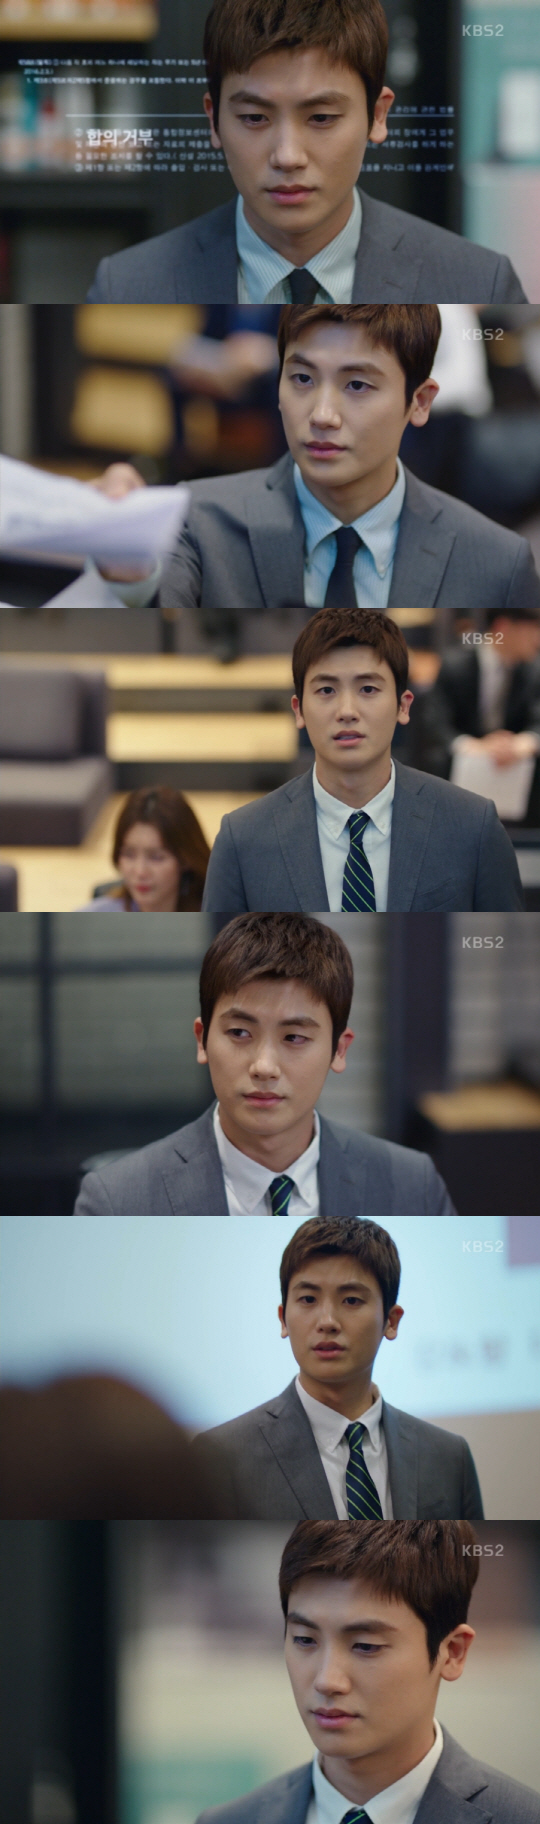 Park Hyung-sik has shown solid growth as an actor.However, Park Hyung-sik has been constantly pouring professional legal terms every time, revealing the identity of lawyer character, while unravelling the Feeling line and development of characters that change every minute with exquisite slow control and shaking the tension of the drama.Sehee, who was in the Innocent Witness seat, took out the story of a rabbit that only Ji-na Kim and Ko Yeon-woo knew, and embarrassed Ji-na Kim.Ji-na Kim, who had a favorable feeling for Ko Yeon-woo, became suspicious of the relationship between Sehee and Ko Yeon-woo.Captured by jealousy and betrayal, he wept as the Innocent Witness newspaper continued.Embarrassed by the sudden tears of Ji-na Kim, Ko failed to draw decisive testimony and lost in Moot Court.Although it was a short god, Park Hyung-sik delicately depicted the spirit of Ko Yeon-woo, who is in conflict between the desire to win the game and the fear that Ji-na Kims secret will be revealed.And eventually, he showed his consideration to give up the victory to keep the secret of Ji-na Kim.Thanks to the intense performance of Park Hyung-sik, who was perfectly melted into the gesture of the expression of the expression of the eyes, this mot court god could not let go of Tension.In addition, it has made expectations about how the relationship with Ji-na Kim will develop in the future.In addition, the romance with Jang Dong-gun is getting stronger.The romance of wonderful men who are increasingly trusting and relying on each other and sharing advice with the same two other mens charm confrontations is becoming the most powerful weapon of Suits.In the performance of Park Hyung-sik, Suits keeps the first place in the drama.Suits, which aired on the day, recorded TV viewer ratings of 7.9 percent (Nilson Korea, national standards).This is 1 percentage point lower than the previous broadcast (8.9 percent), but it is the first time in the same time zone.MBC broadcast on the same time zone Lets look at the sunset holding hands 2.8% 3.8%, SBS Switch - change the world 5.9% 7.2% TV viewer ratings.Park Hyung-sik is a smoke stone that was devoted to children of the Boy Group empire in 2009.However, he has grown to become a Main actor by starting from child or Jordan in various works such as Fool Mom, Sirius, Nine - Nine Hours Travel, Heirs, Why are the family together, Hwarang: The Poet Warrior YouthAnd the effort is shining in the face of Suits.Jang Dong-gun Ko Sung-hee and other opponents, showing off the chemistry with the chemistry, and showing the tension of the drama beyond the Chemi Fairy.Fans applaud the growth of Park Hyung-sik, and now there is a lot of support for looking at Park Hyung-sik as an actor, not just a smoke stone.In the future, Park Hyung-sik, who is wearing Suits, is looking forward to showing his performance.